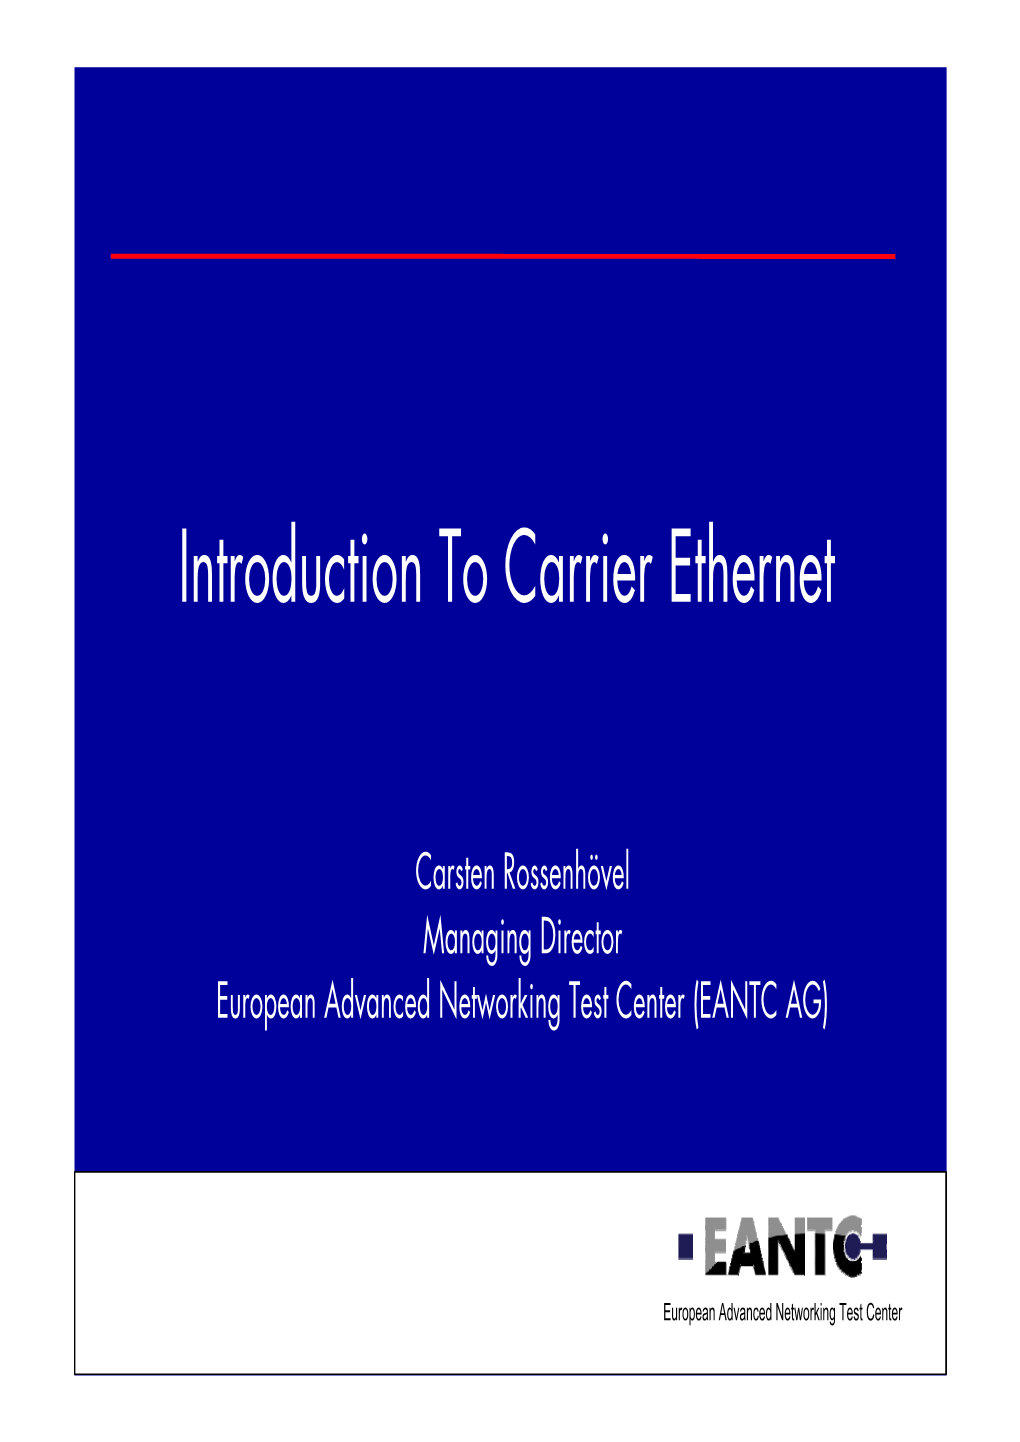 Introduction to Carrier Ethernet